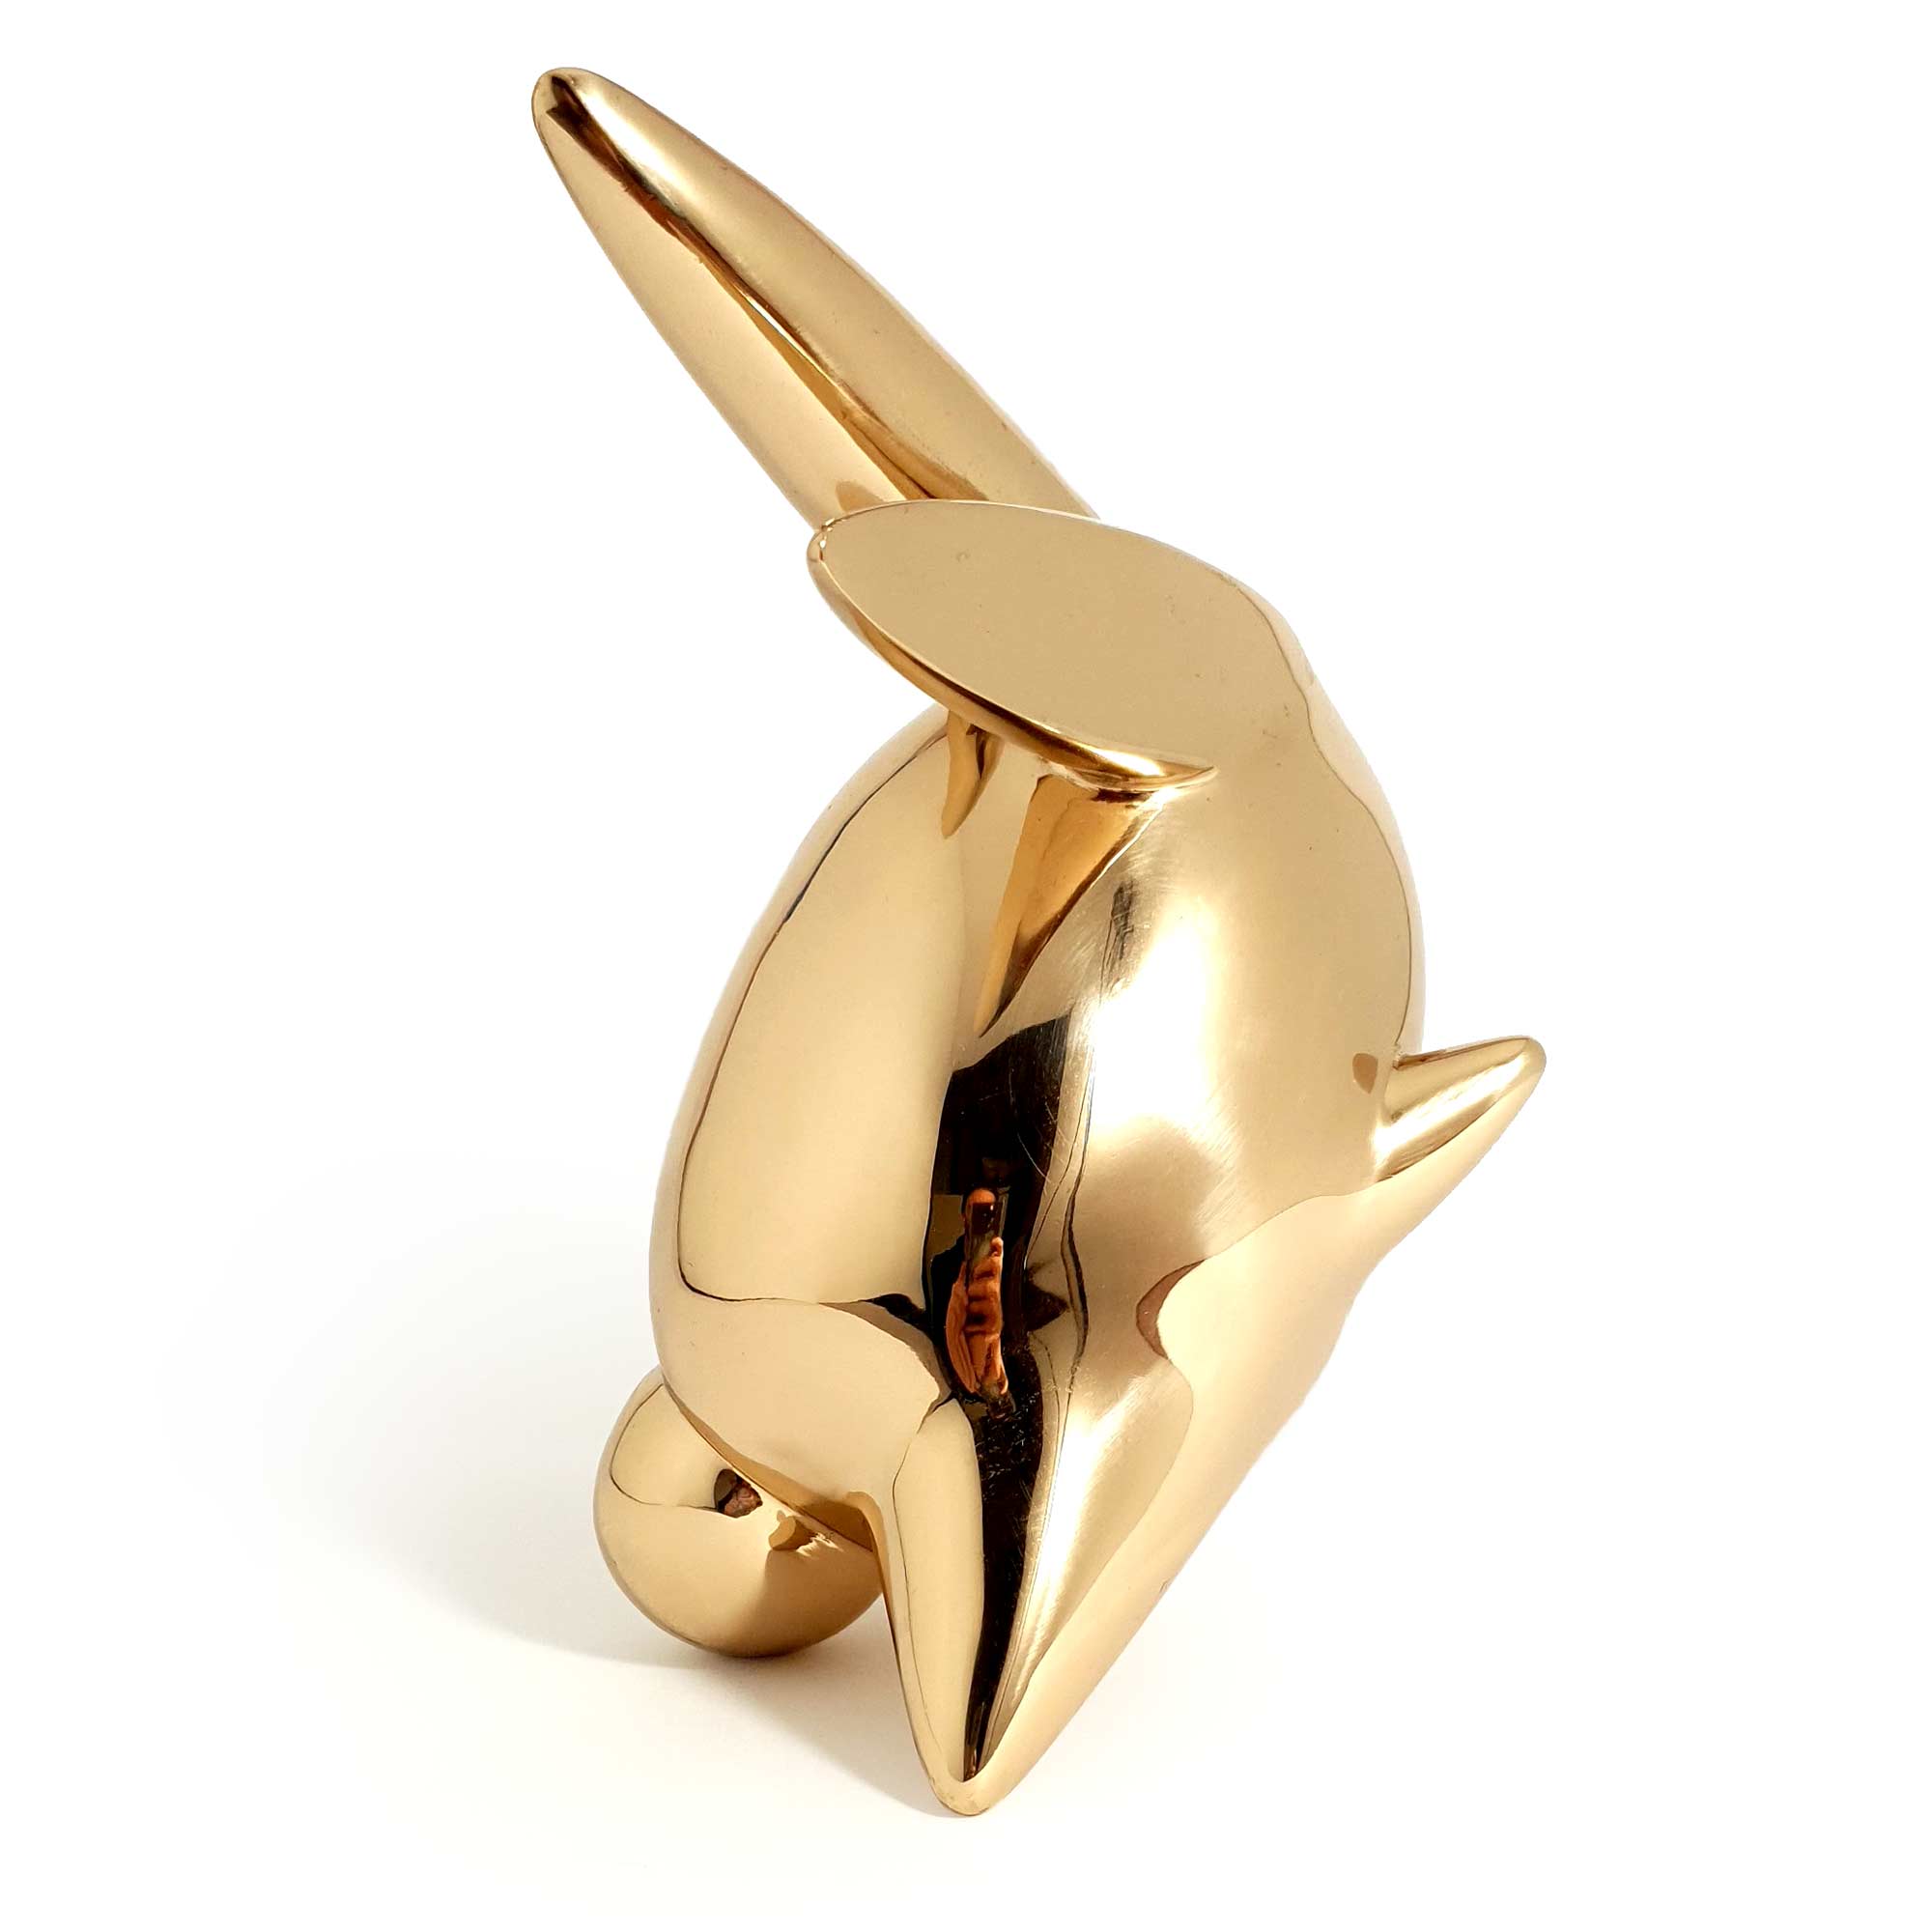 Flight or Fight, bunny rabbit sculpture, gold Mirror Polished Stainless Steel Sculpture, by artist Ferdi B Dick, back